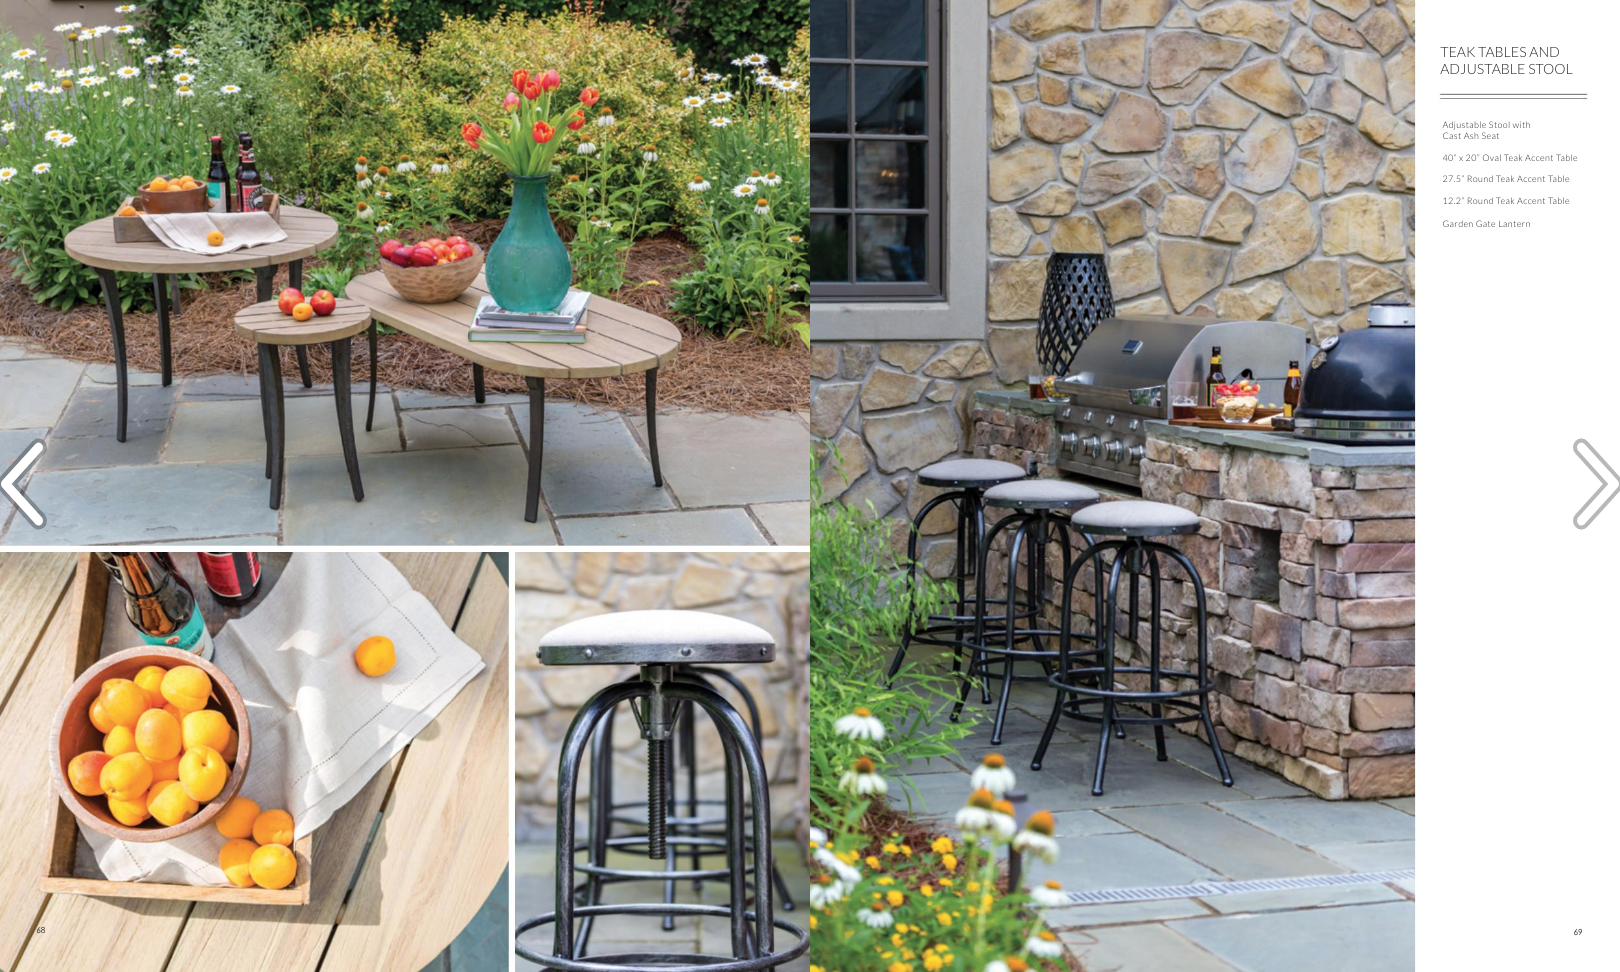 Catalog layout featuring their outdoor adjustable stools and teak tables